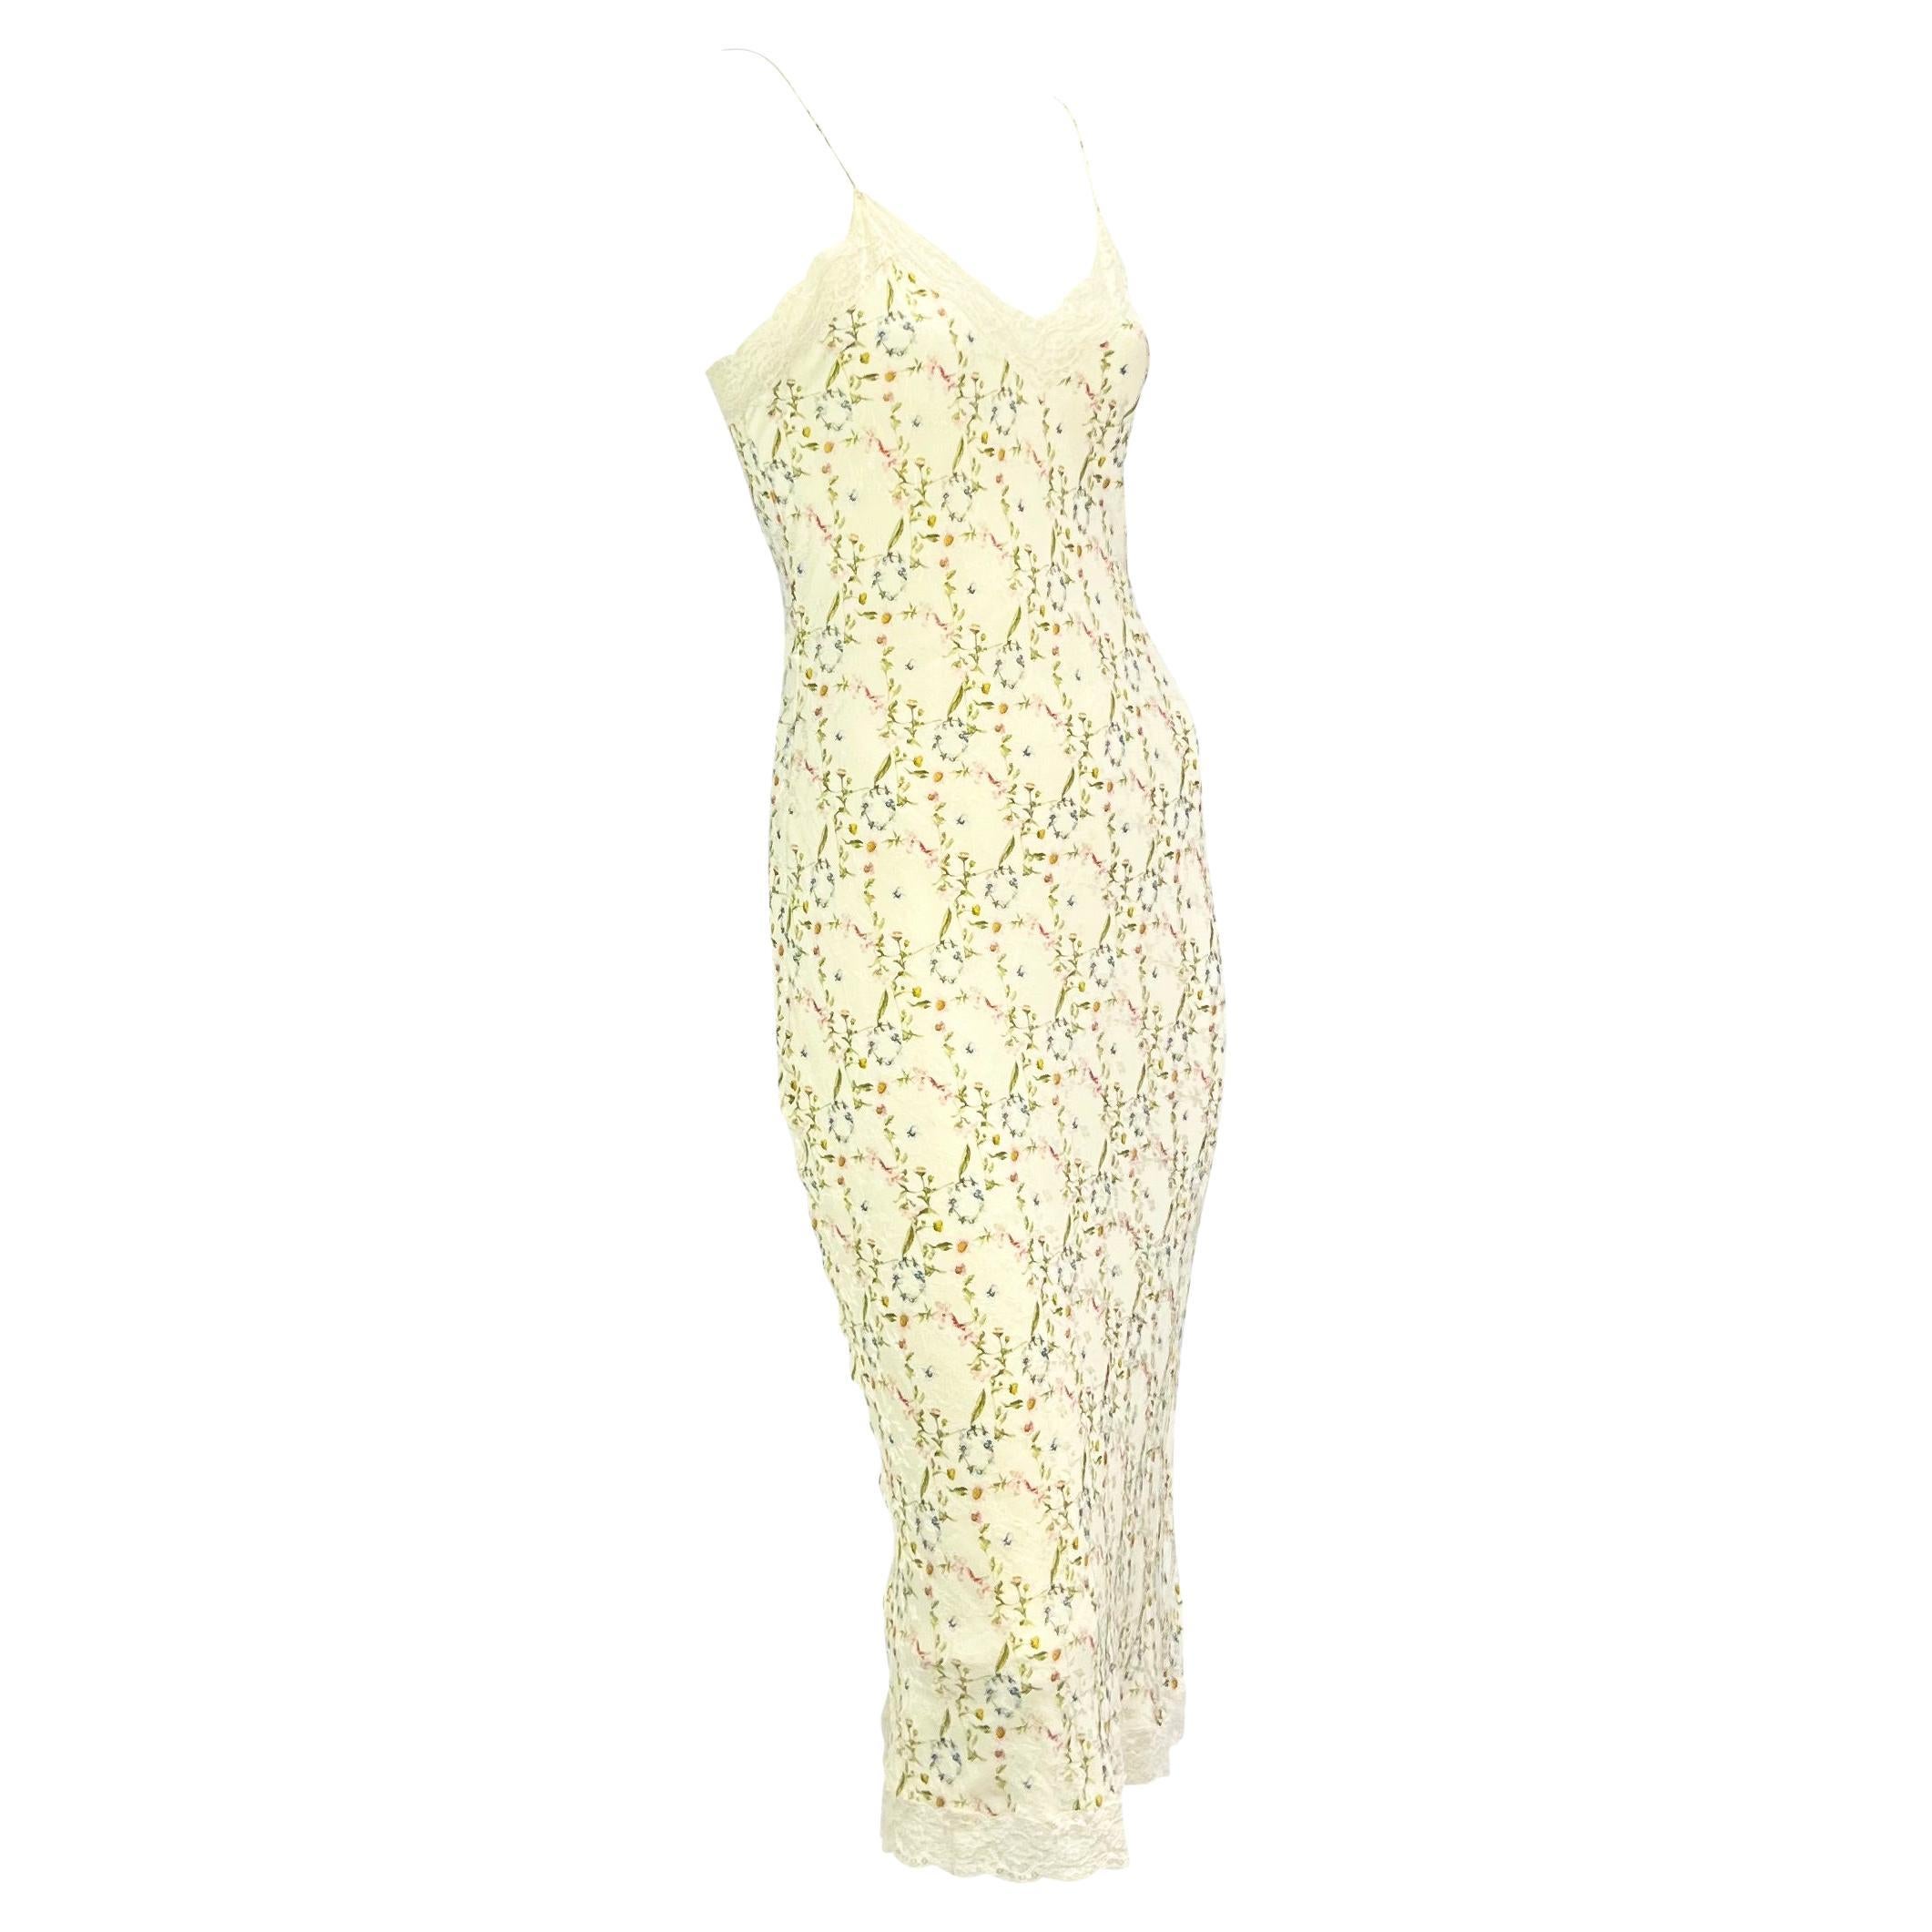 S/S 2005 Christian Dior by John Galliano Floral Diorissimo Lace Slip Dress 3